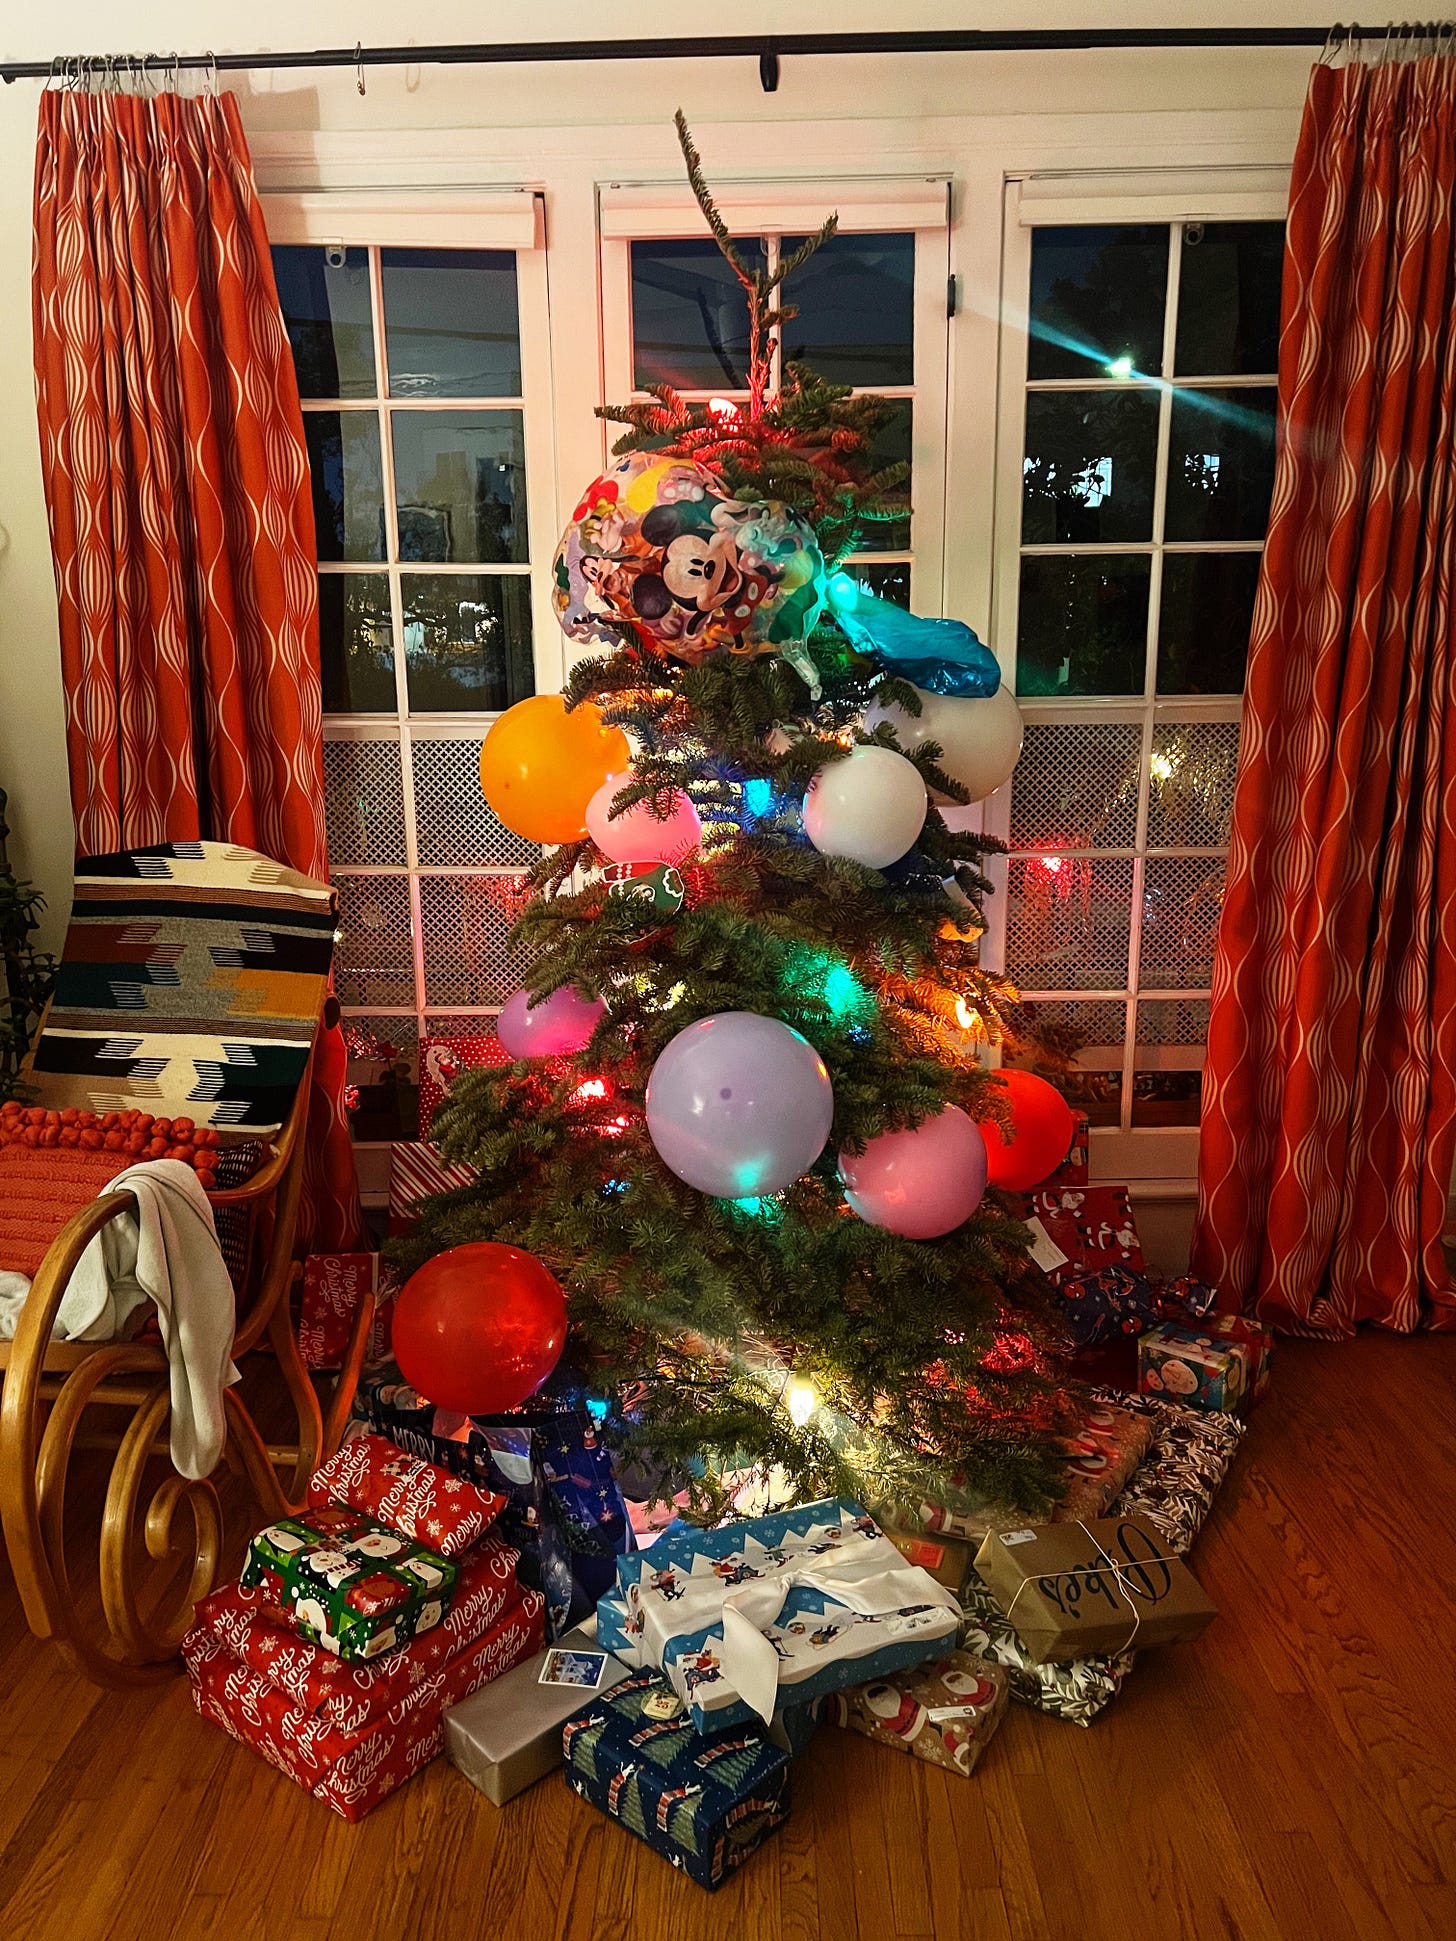 A photo of the author's tree.